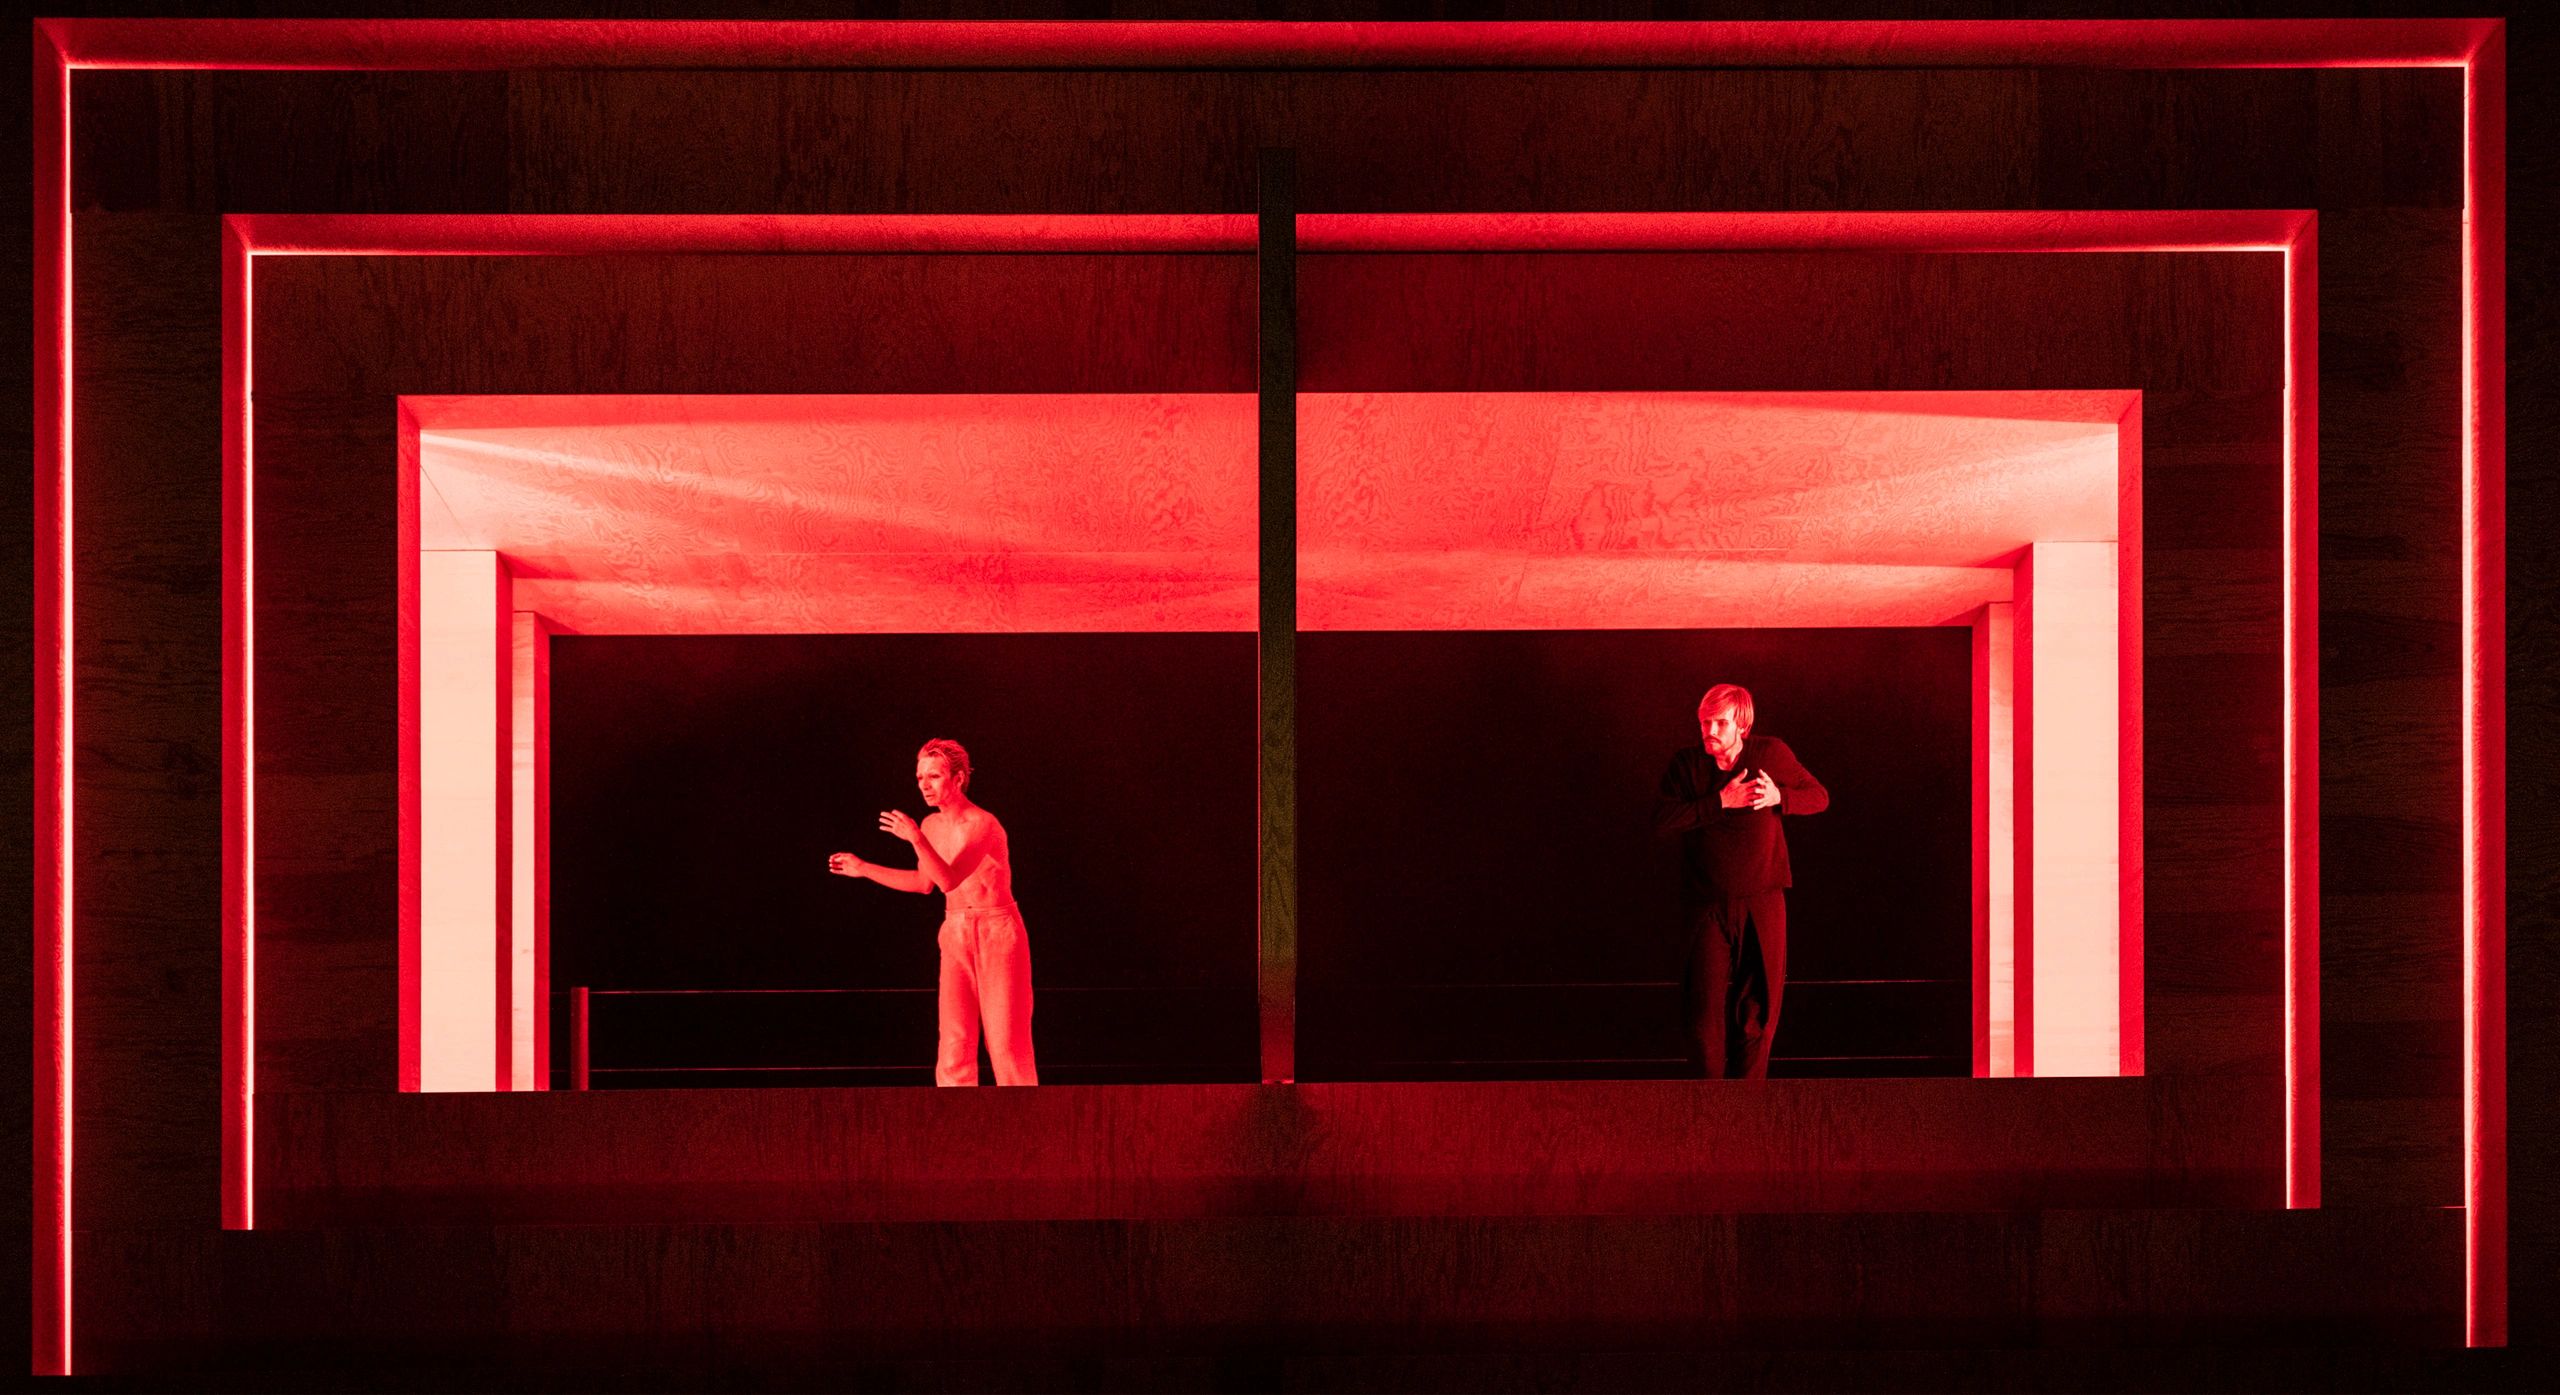 Proietto and Henriksen in The Hamlet Complex, a dance and theatre work by Alan L. Øyen at DNO&B